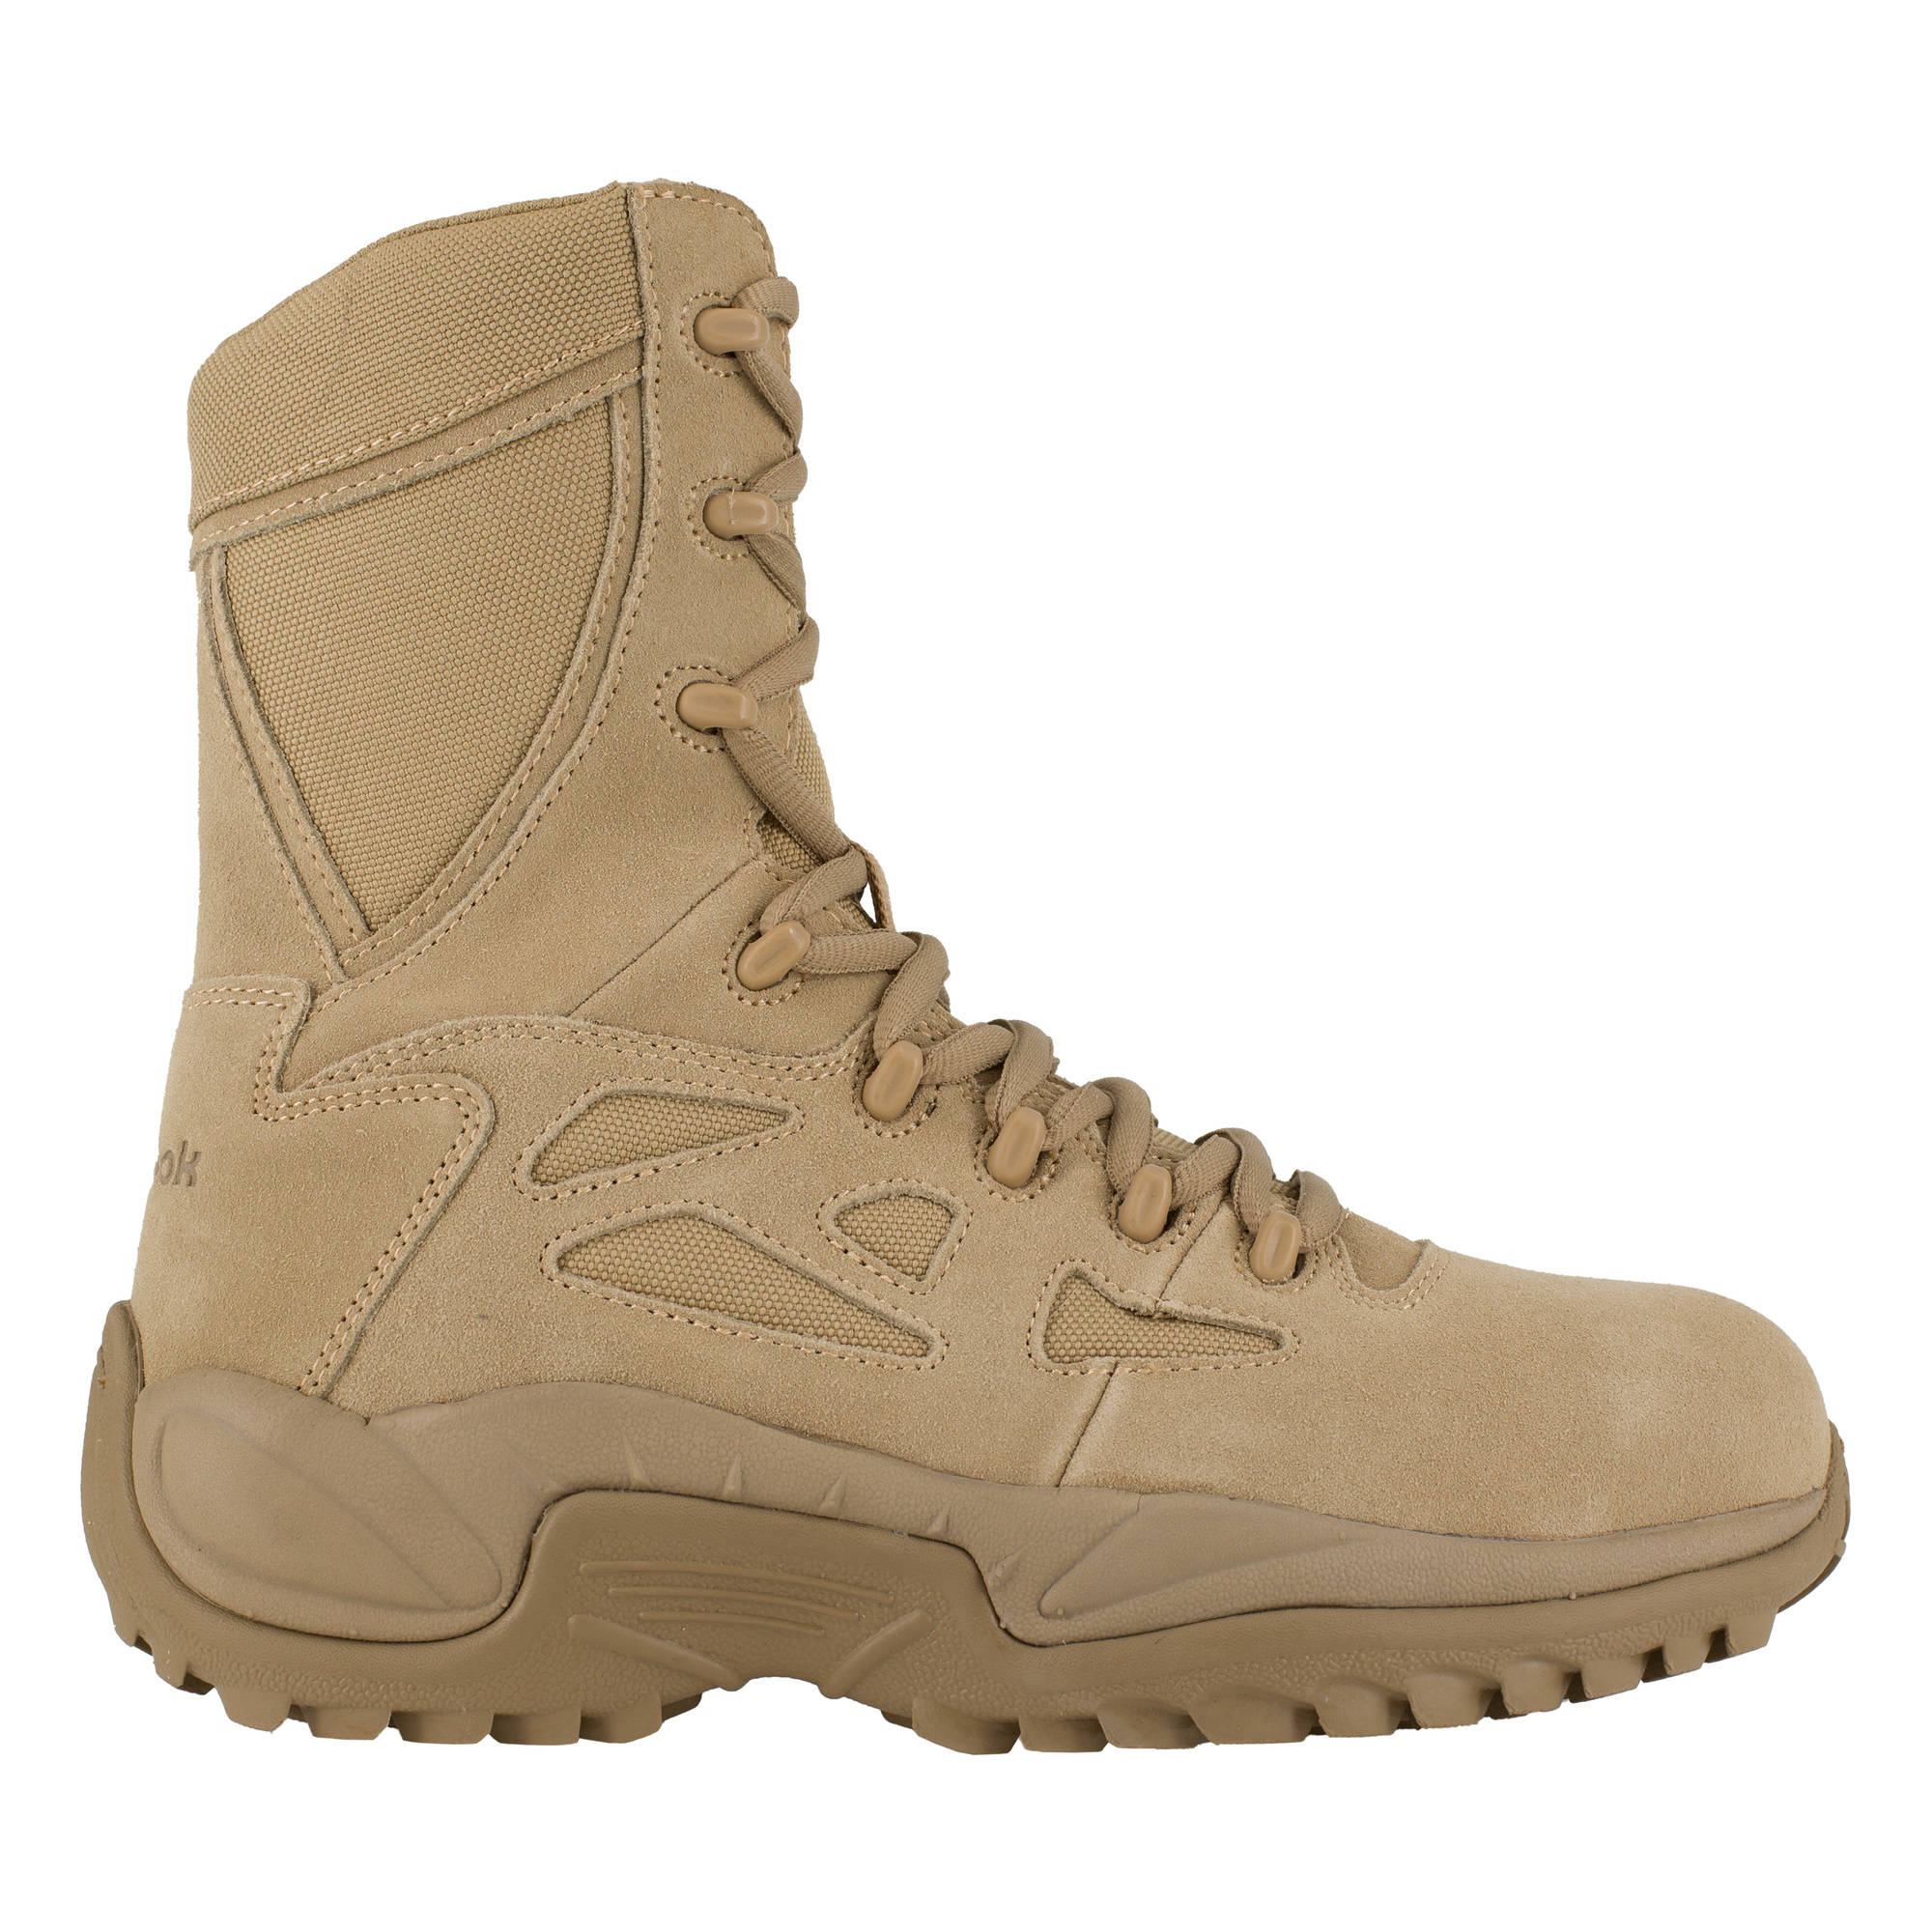 Reebok, 8Inch Stealth Tactical Boot with Side Zipper, Size 10 1/2, Width Medium, Color Desert Tan, Model RB894 -  RB894-M-10.5